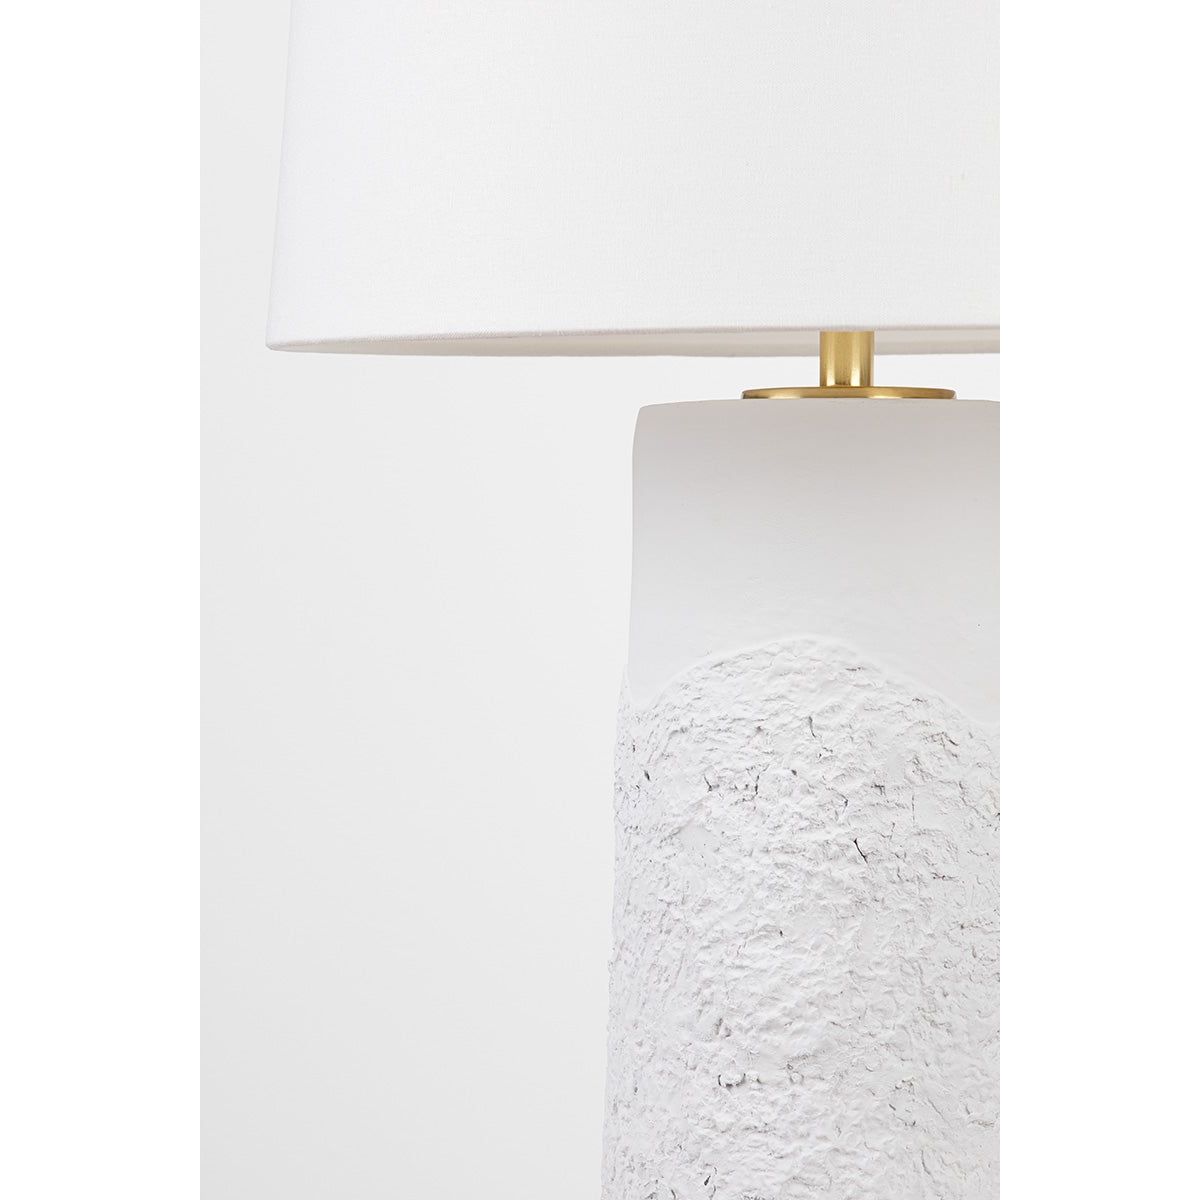 Tolland 1-Light Table Lamp